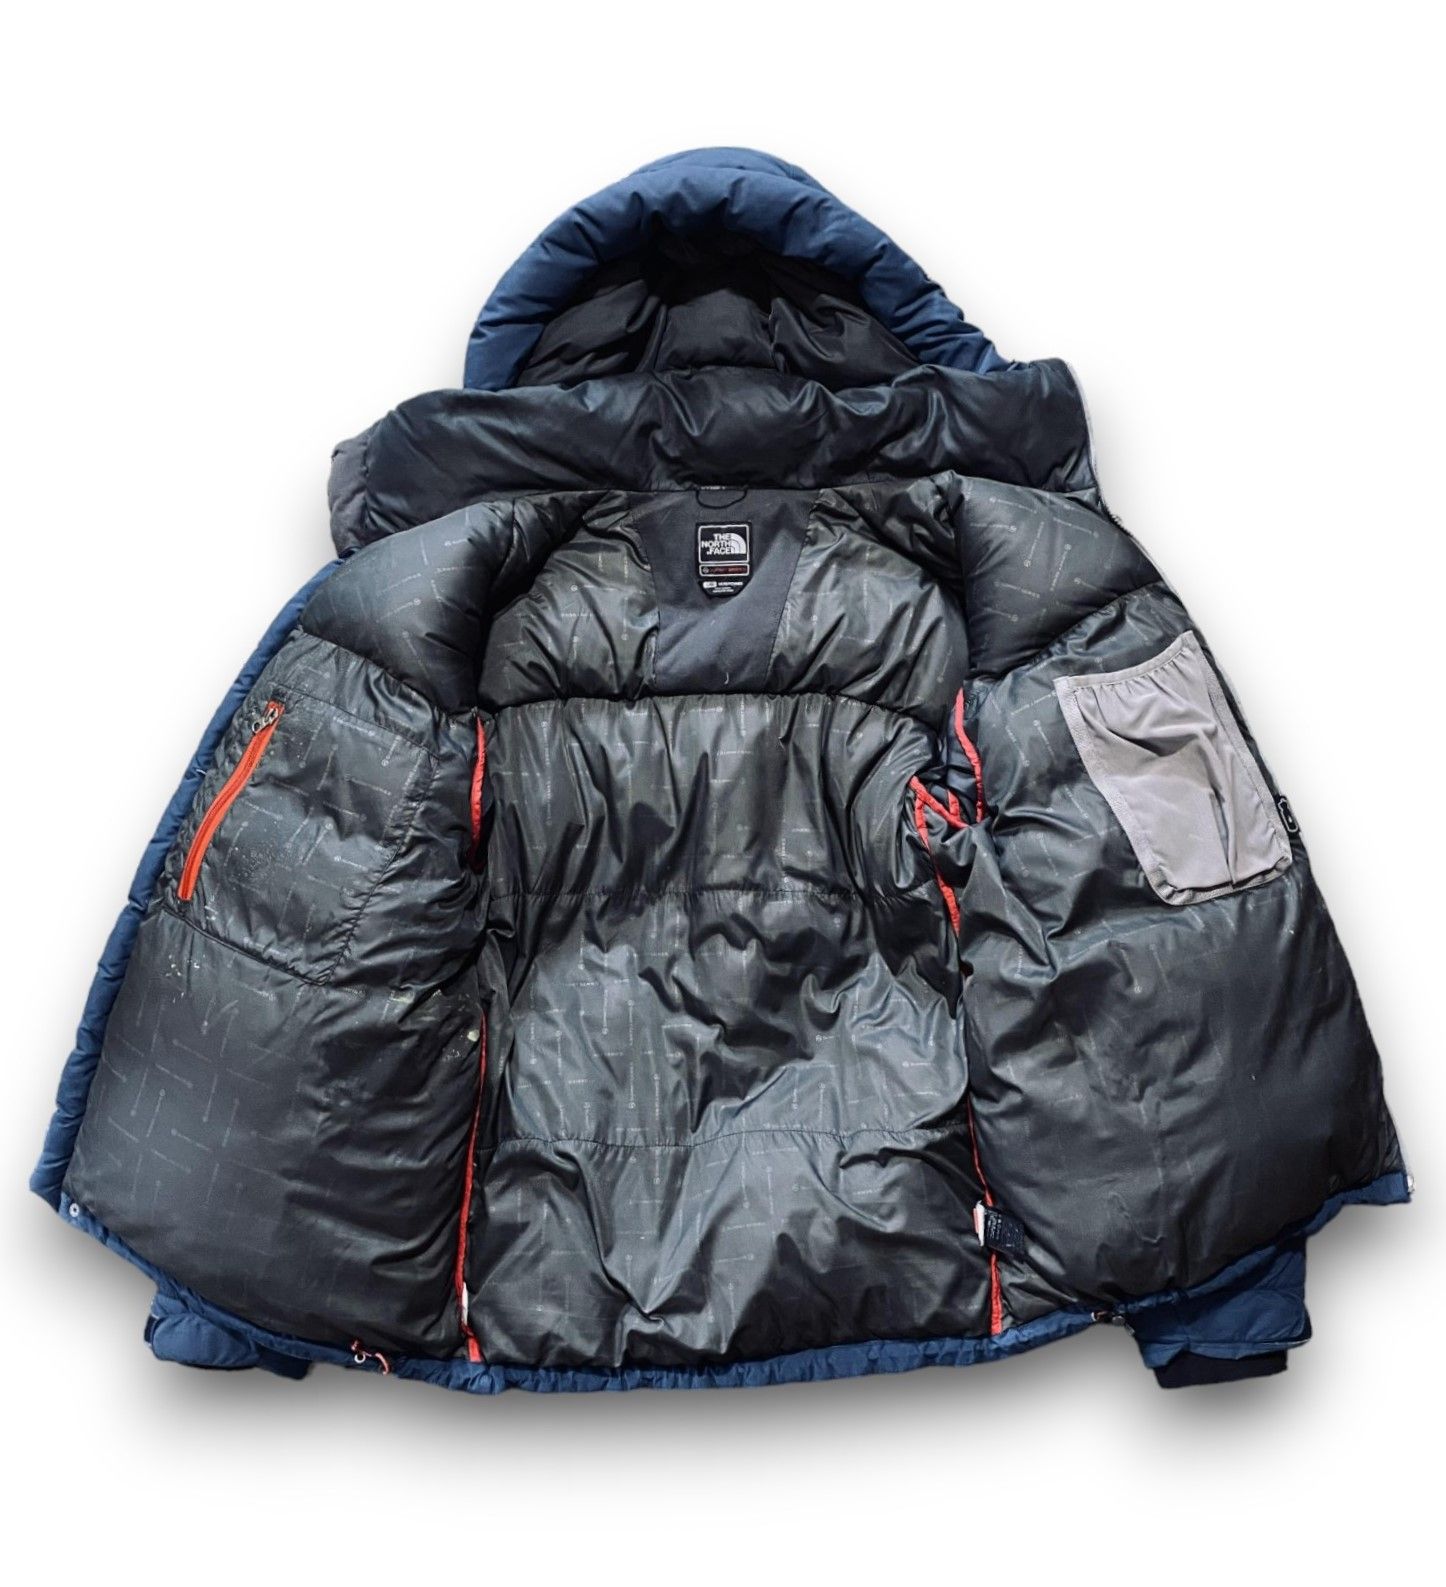 The North Face Puffer Jacket Summit Series 700 Navy - 16